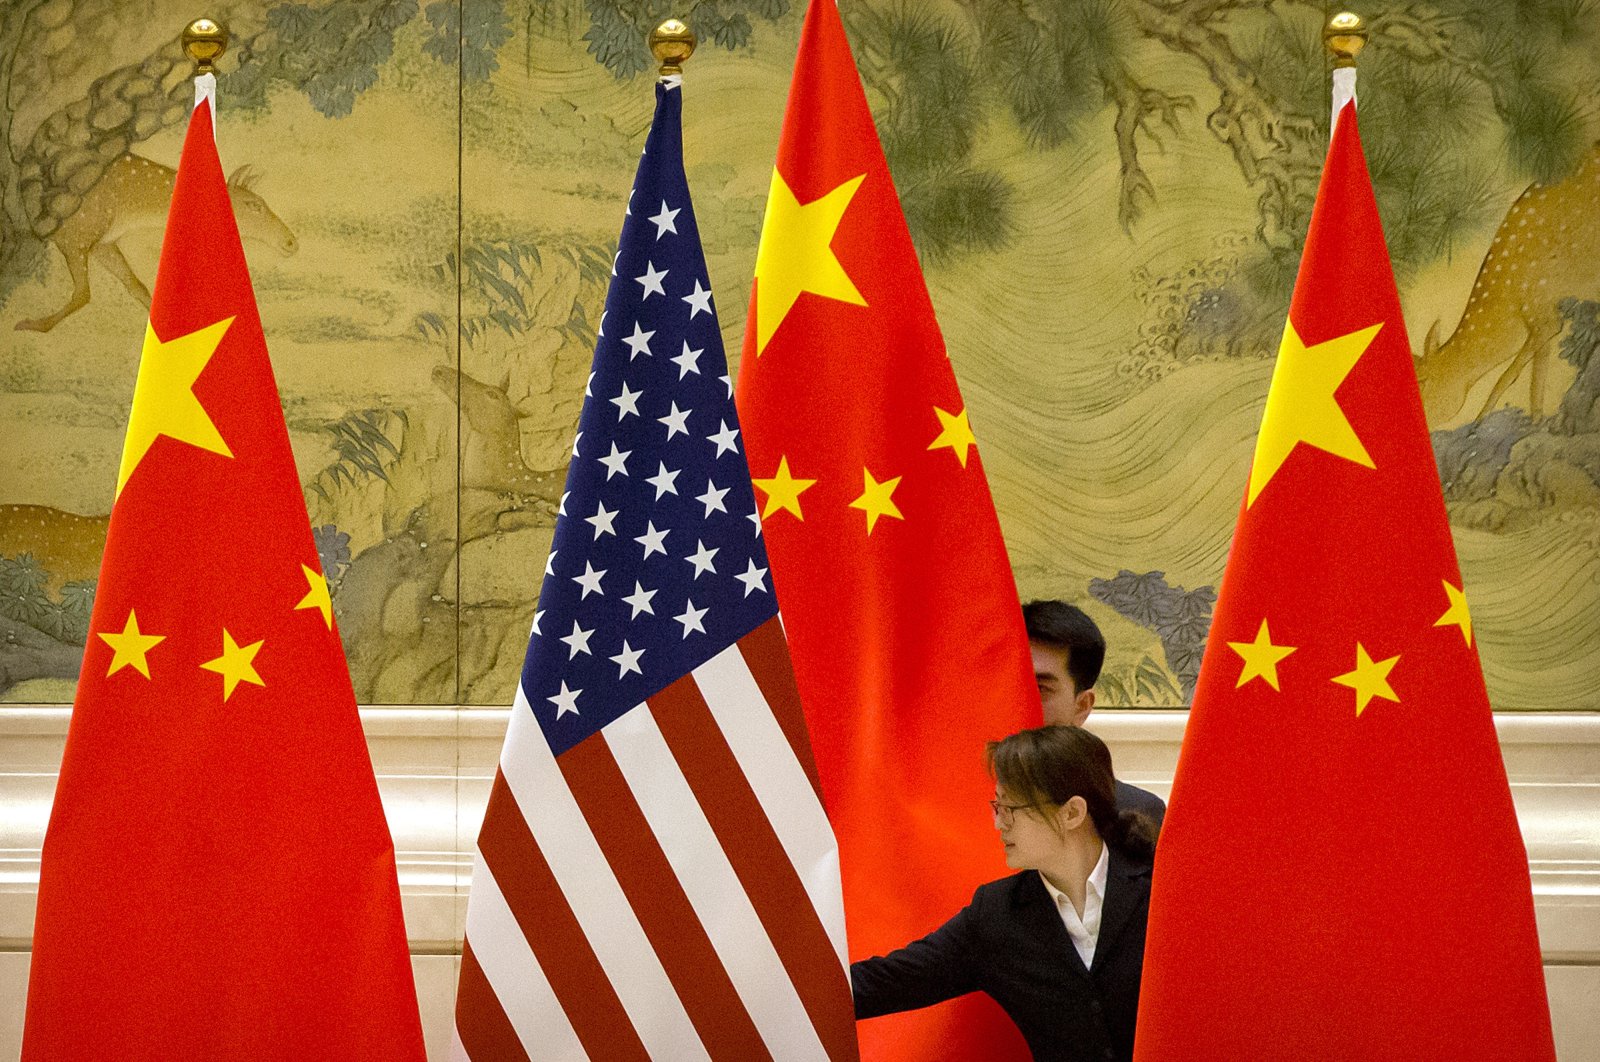 Chinese staffers adjust the U.S. and Chinese flags before the opening session of trade negotiations between U.S. and Chinese trade representatives at the Diaoyutai State Guesthouse in Beijing, Feb. 14, 2019. (AP Photo)